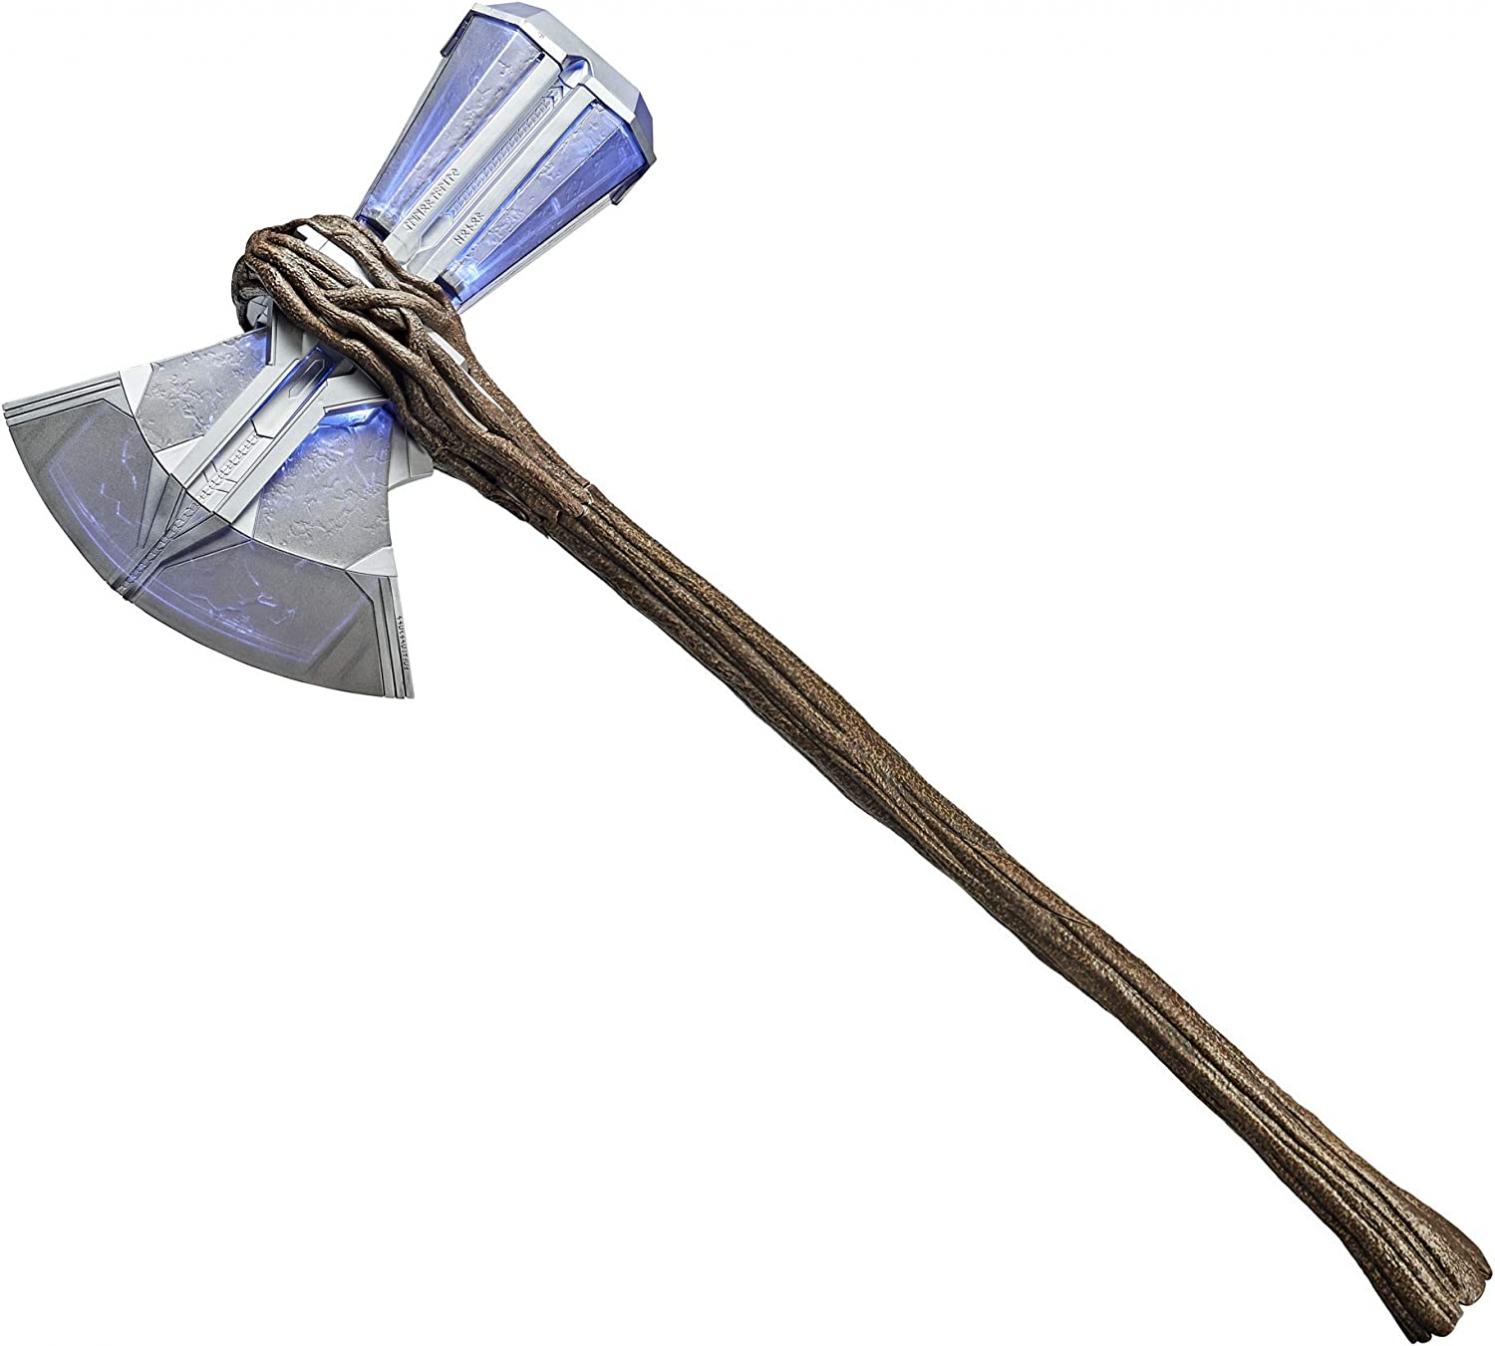 Avengers Marvel Endgame Marvel Legends Stormbreaker Electronic Axe Thor Premium Roleplay Item with Sound FX, for Fans, Collectors, and Adults